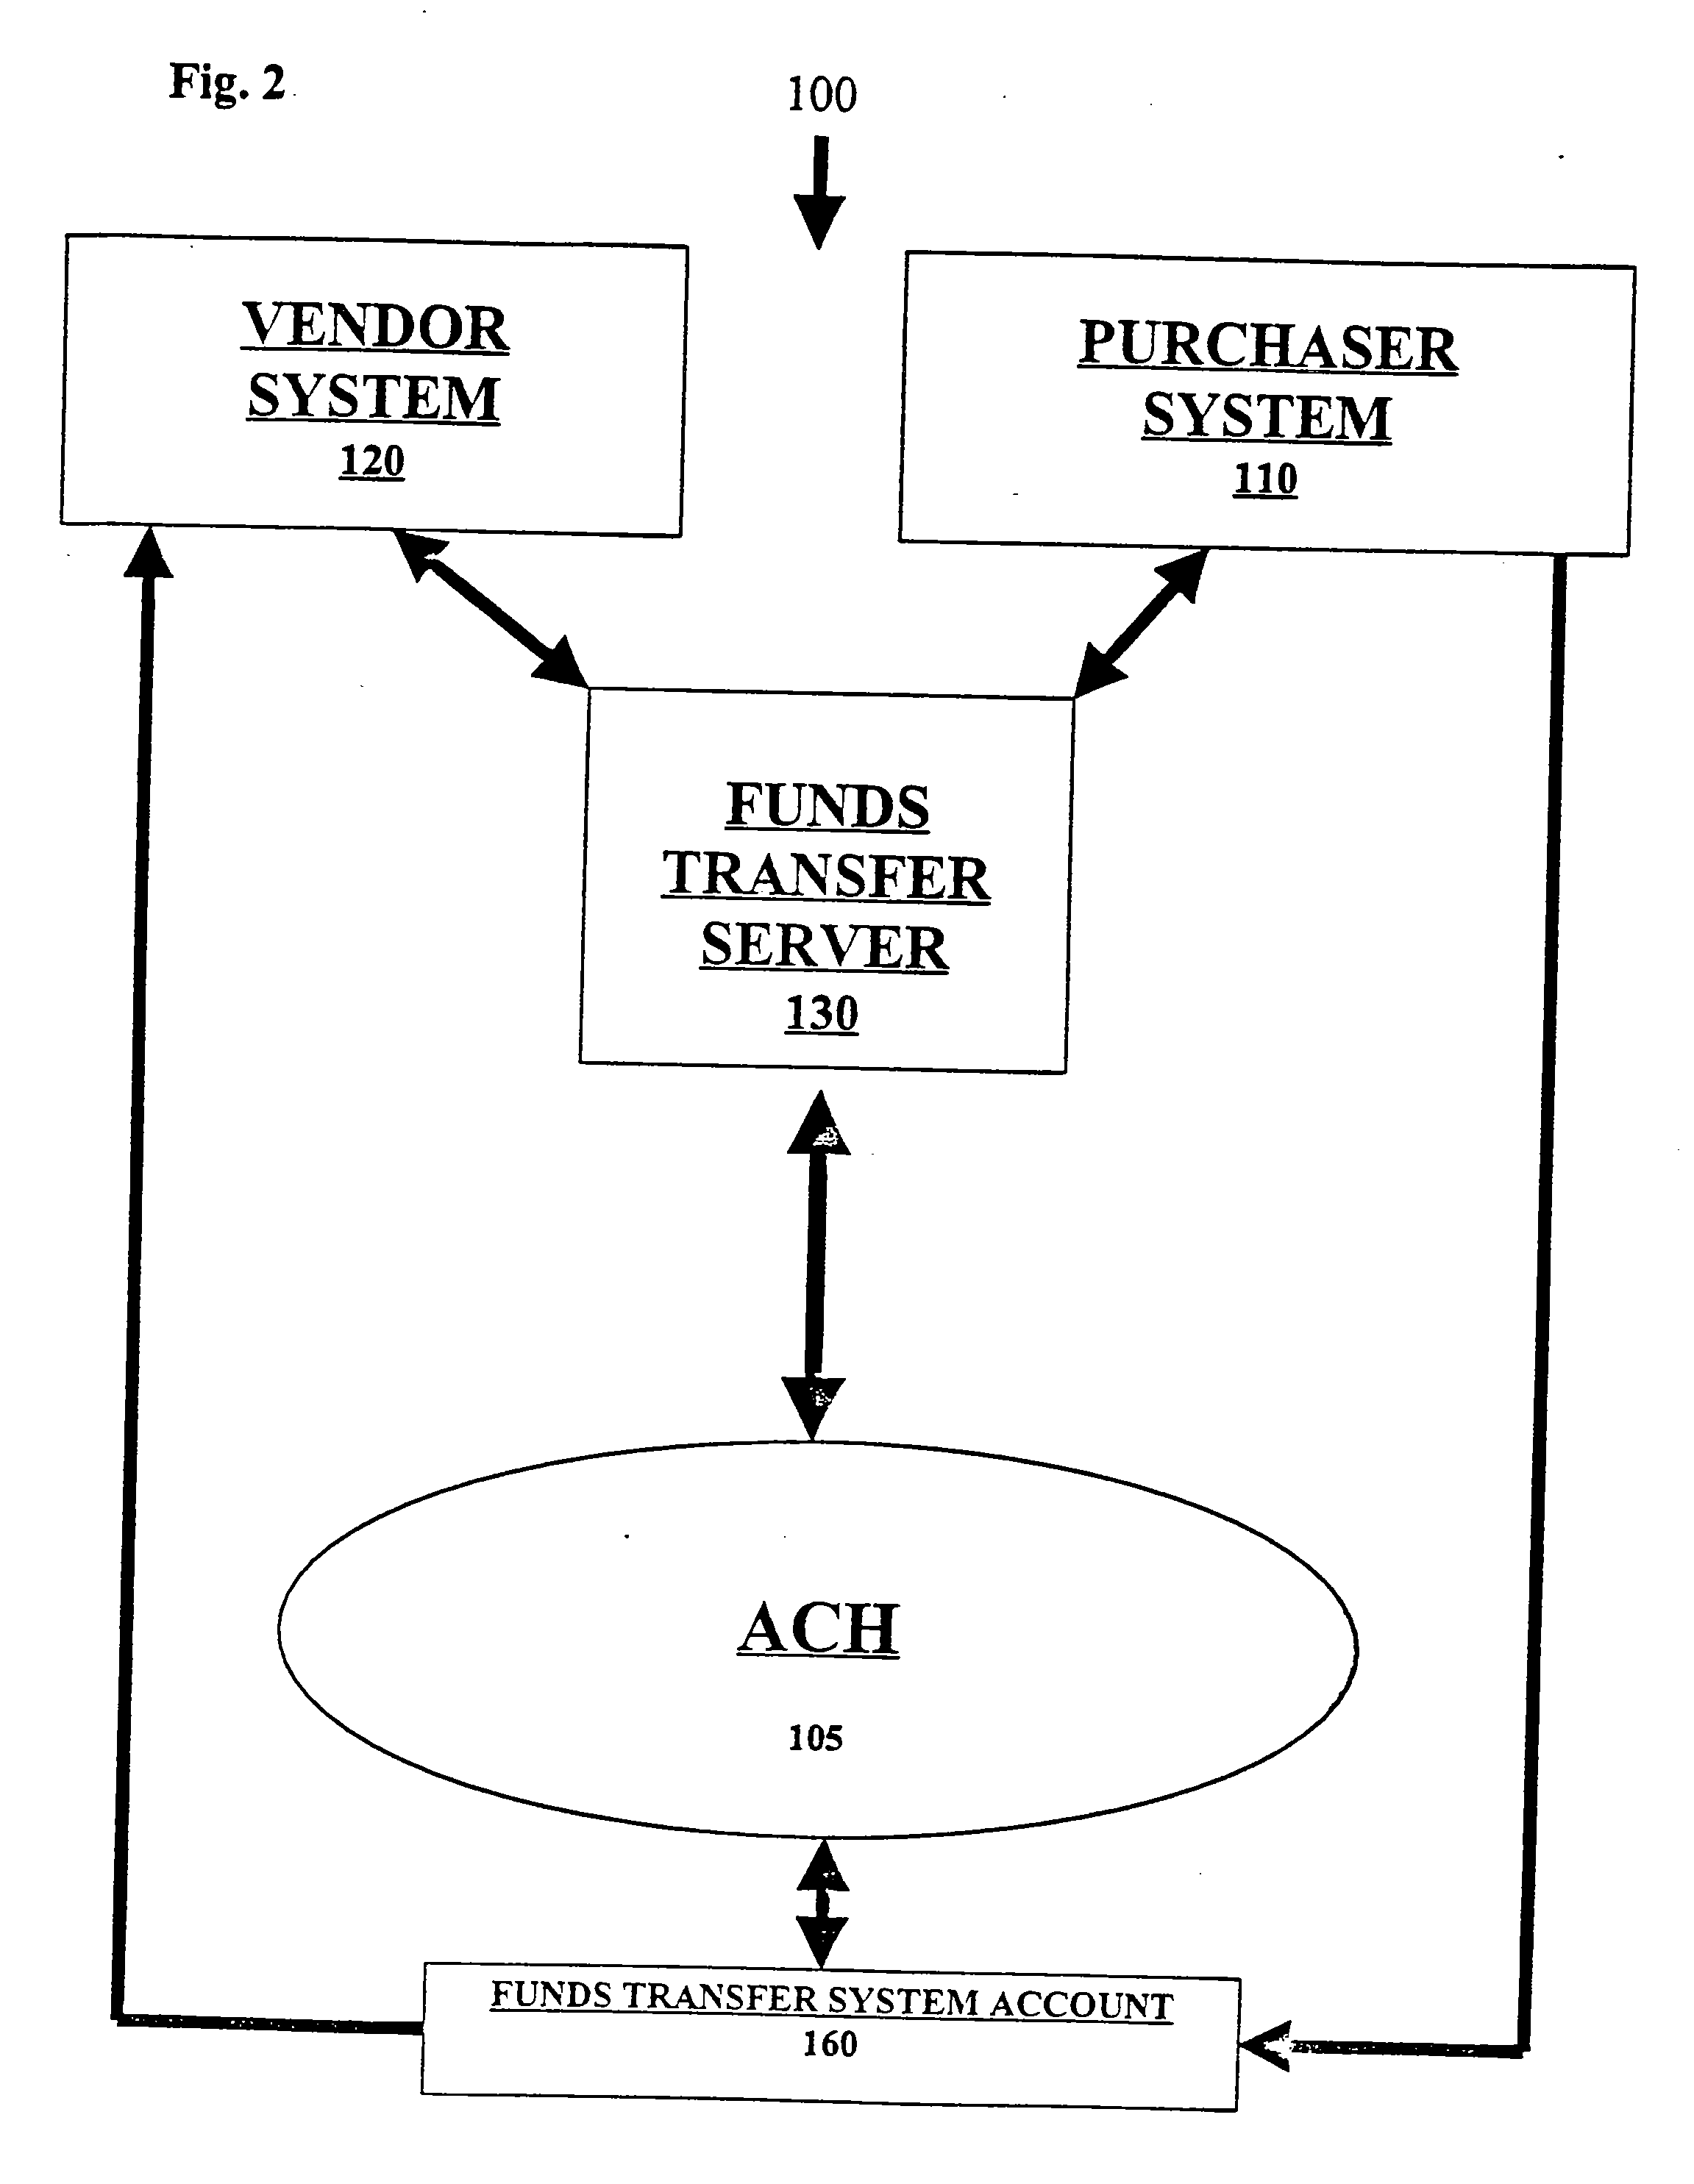 Electronic purchasing and funds transfer systems and methods